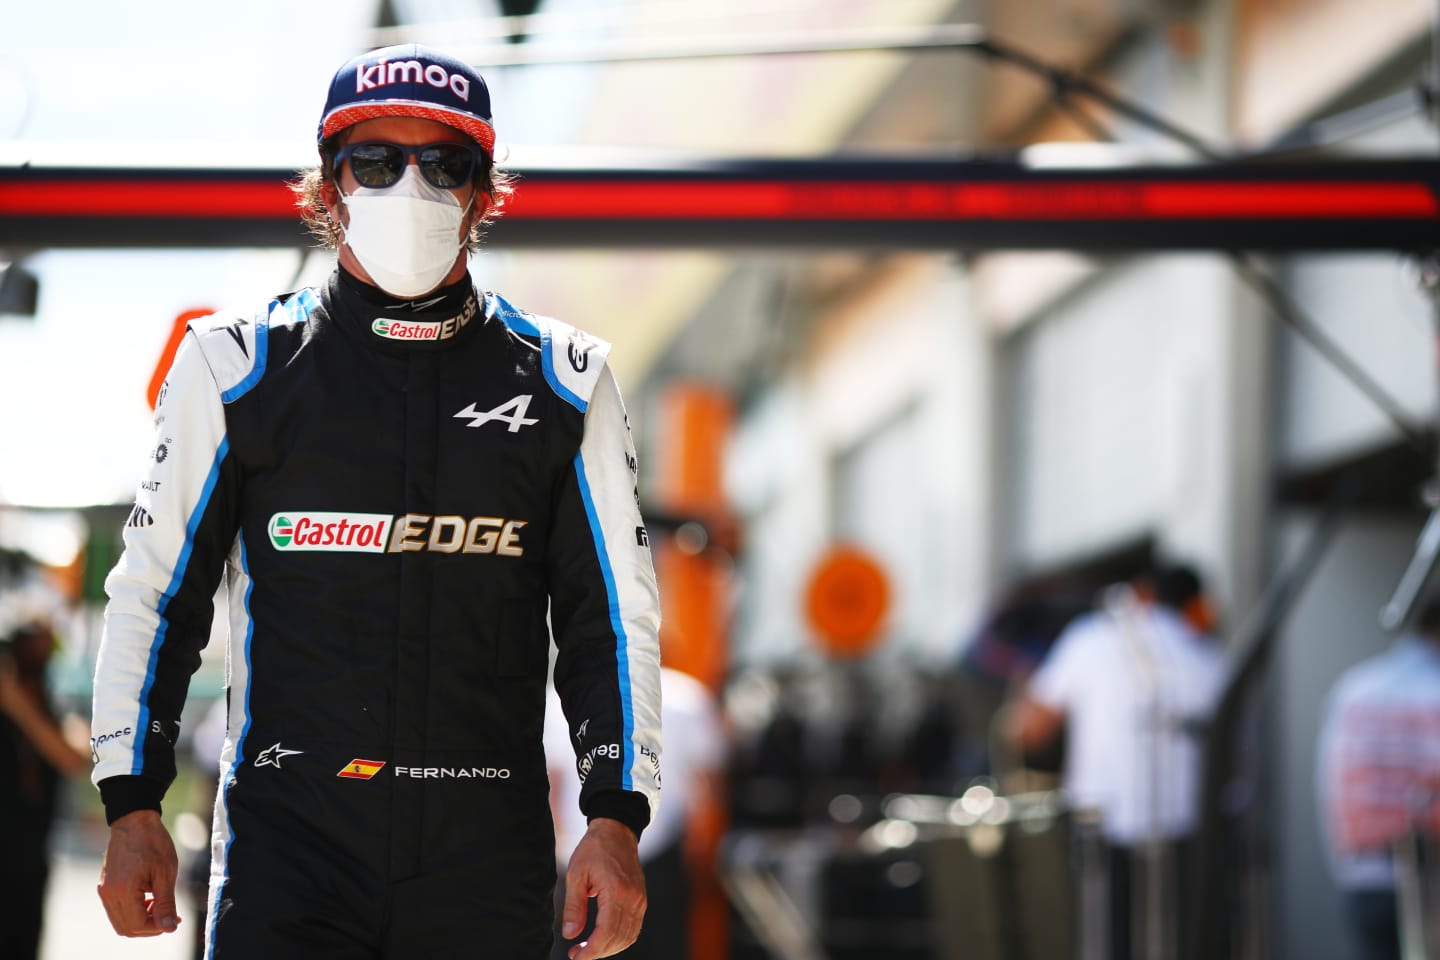 SPIELBERG, AUSTRIA - JULY 03: Fernando Alonso of Spain and Alpine F1 Team walks in the Pitlane during qualifying ahead of the F1 Grand Prix of Austria at Red Bull Ring on July 03, 2021 in Spielberg, Austria. (Photo by Mark Thompson/Getty Images)